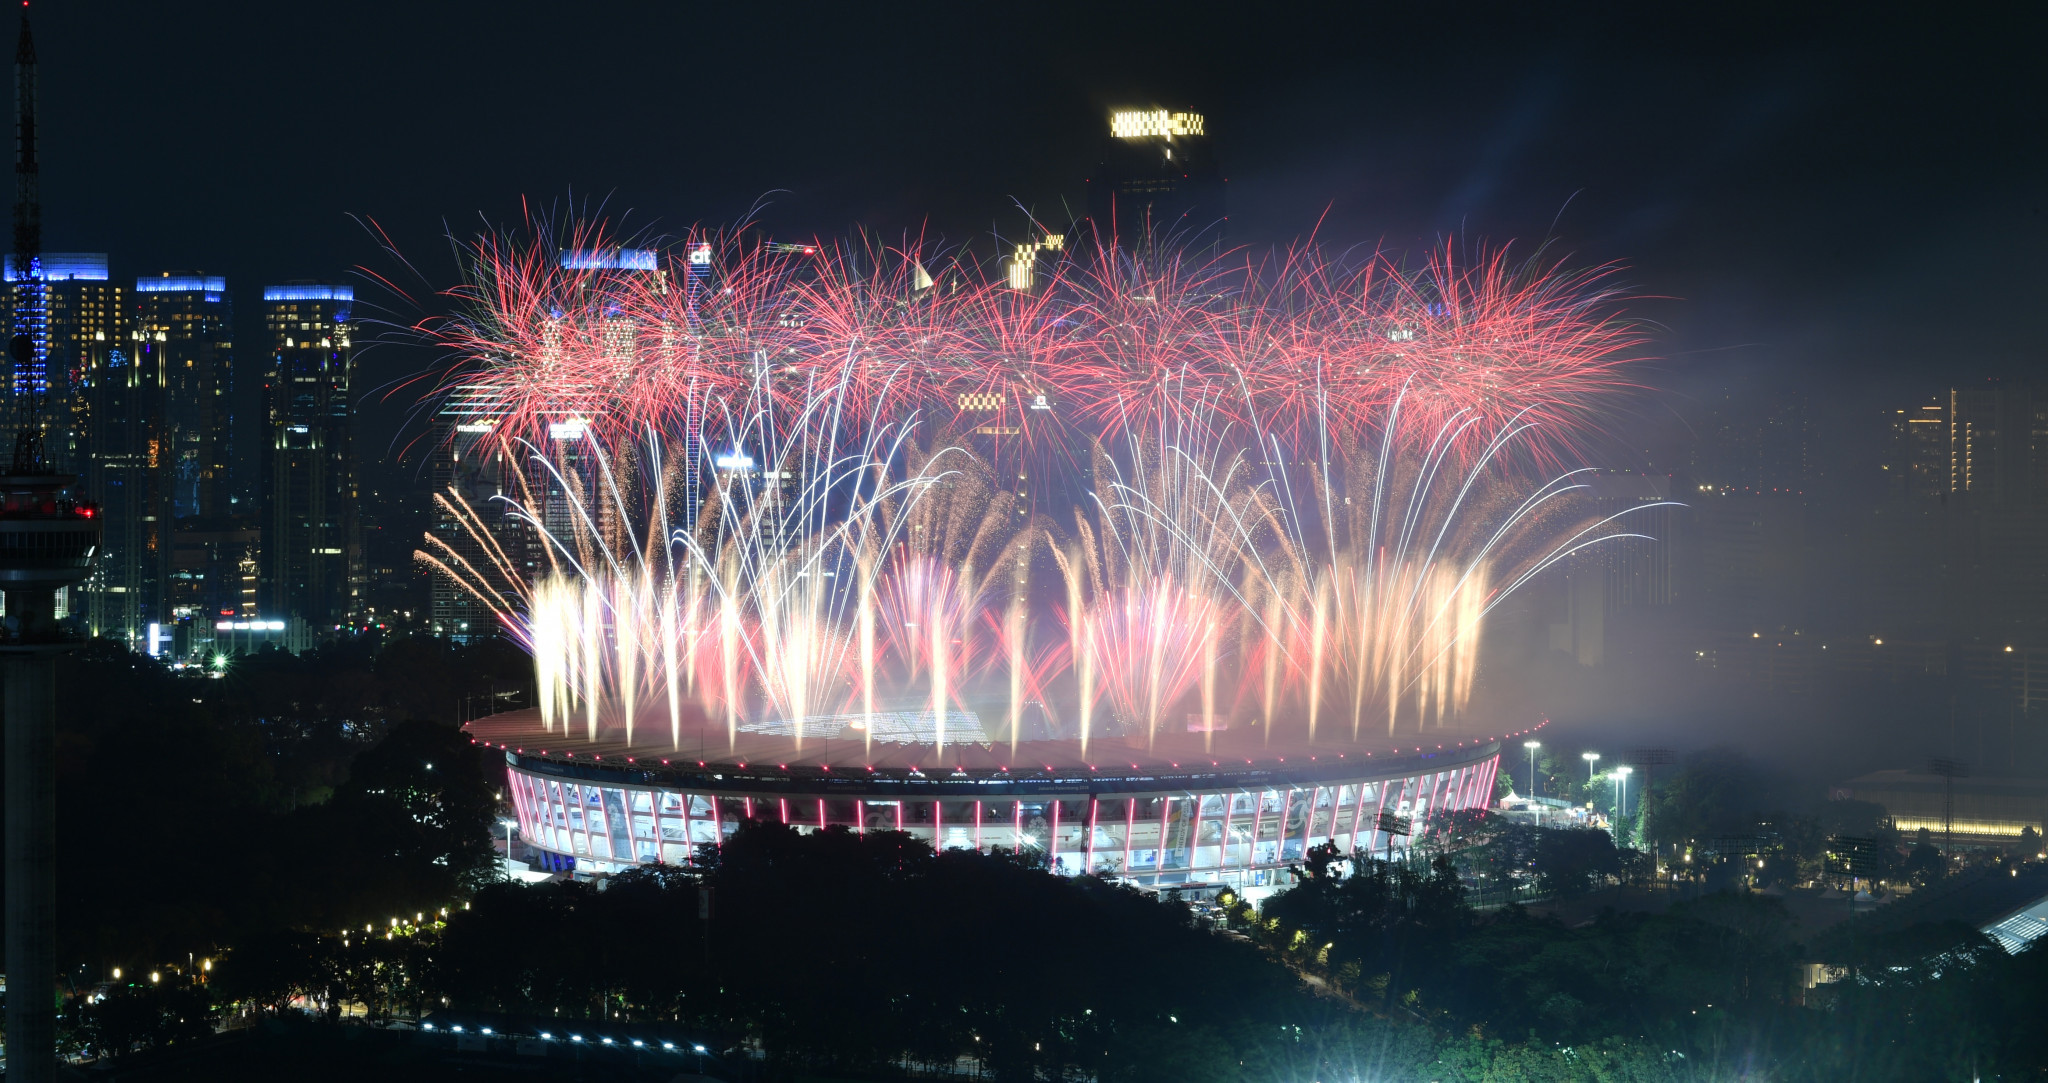 The Ceremony concluded with a spectacular fireworks display, which lit up the Jakarta sky ©Getty Images